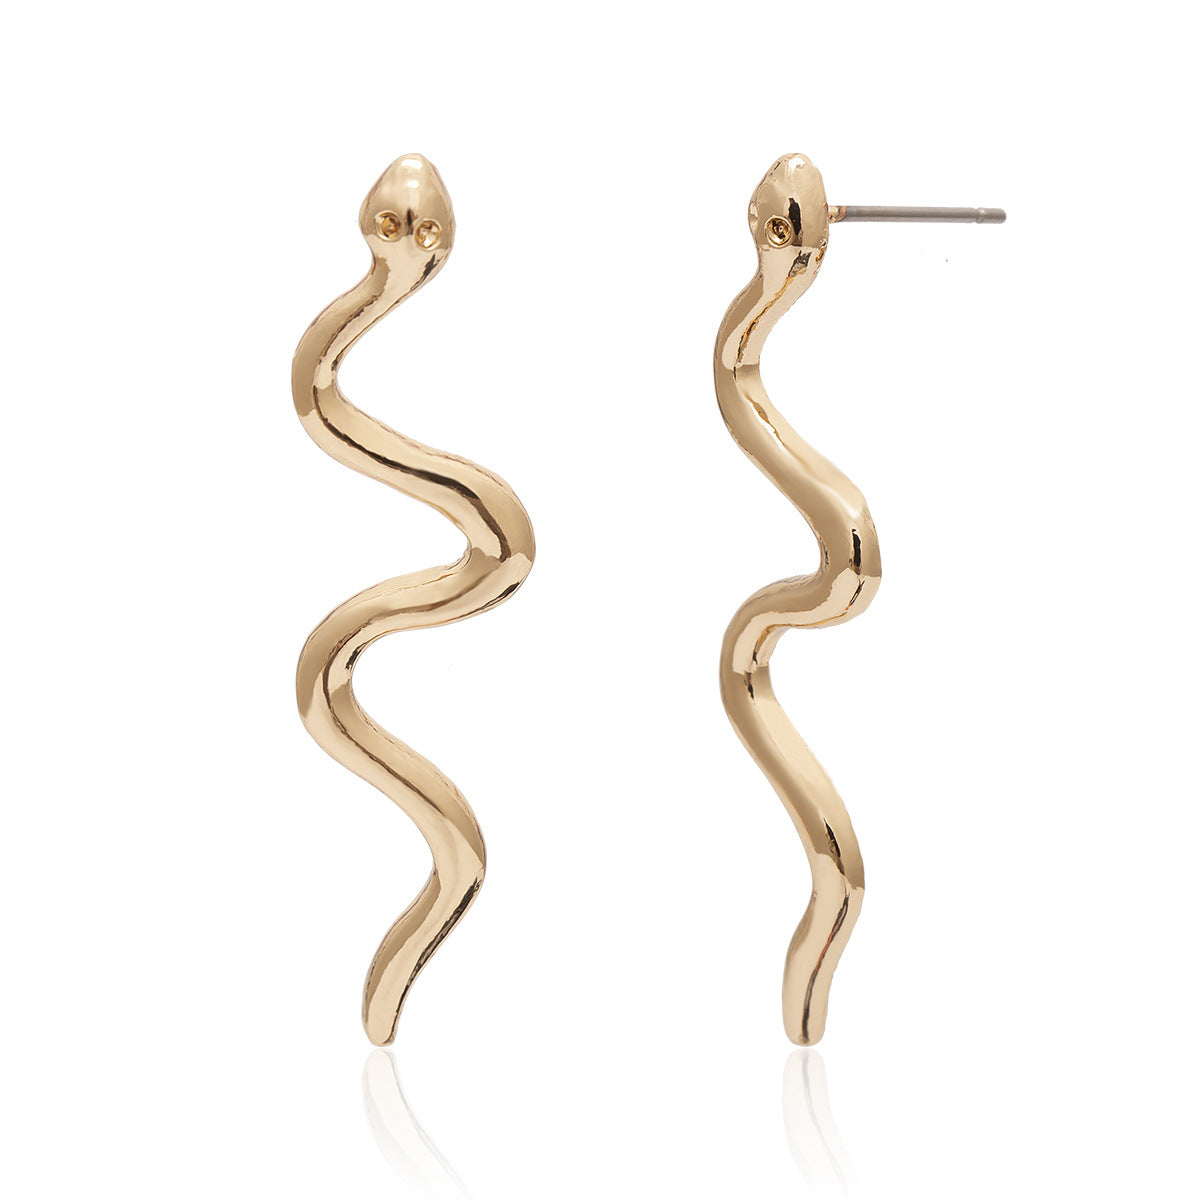 Snake Shaped Geometric Earrings for Stylish Women from Vienna Verve Collection